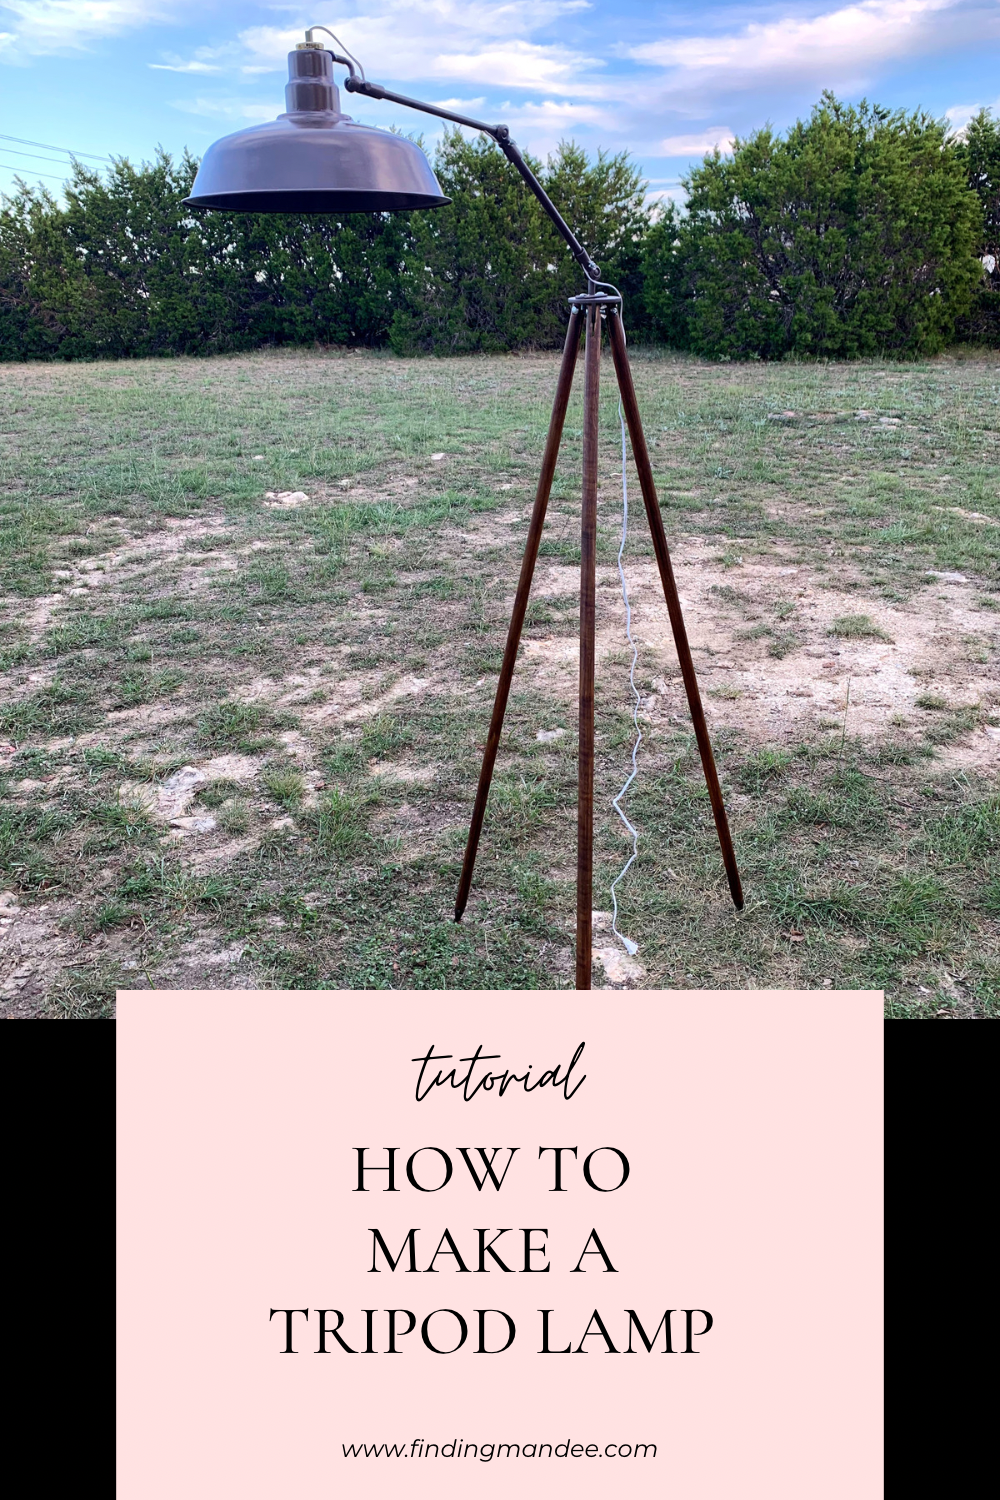 How to Make a Tripod Lamp From an Antique Surveyor's Tripod: A Tutorial | Finding Mandee